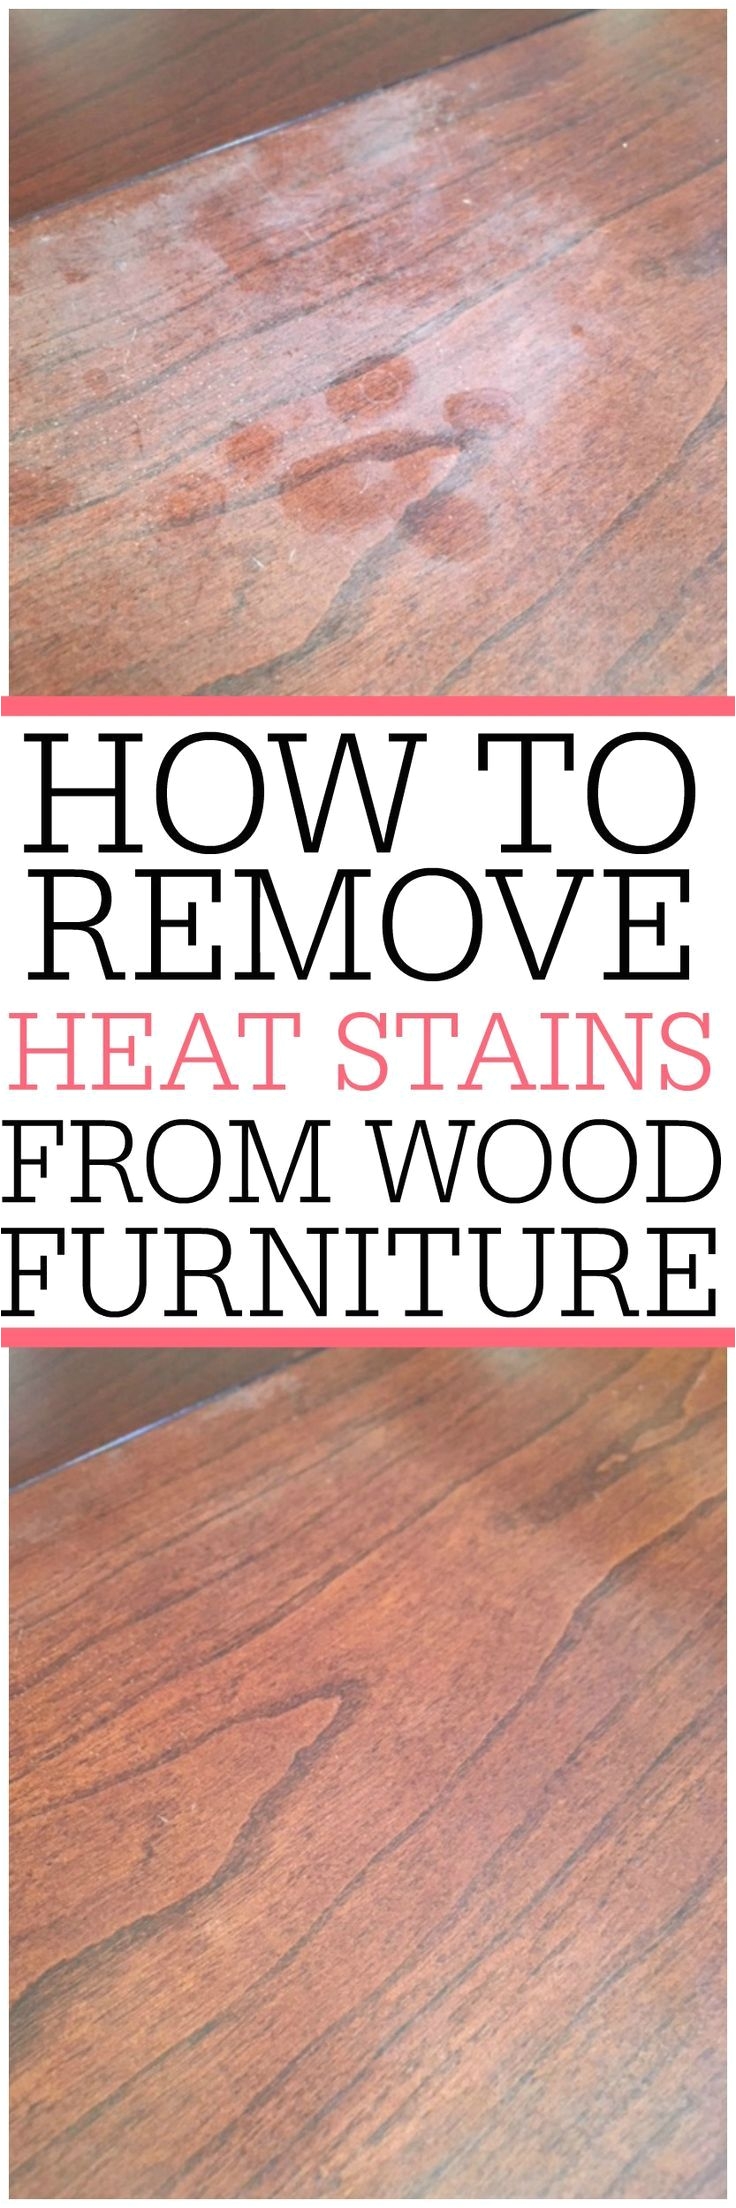 heat stains on wood furniture check out an easy way on how to remove heat